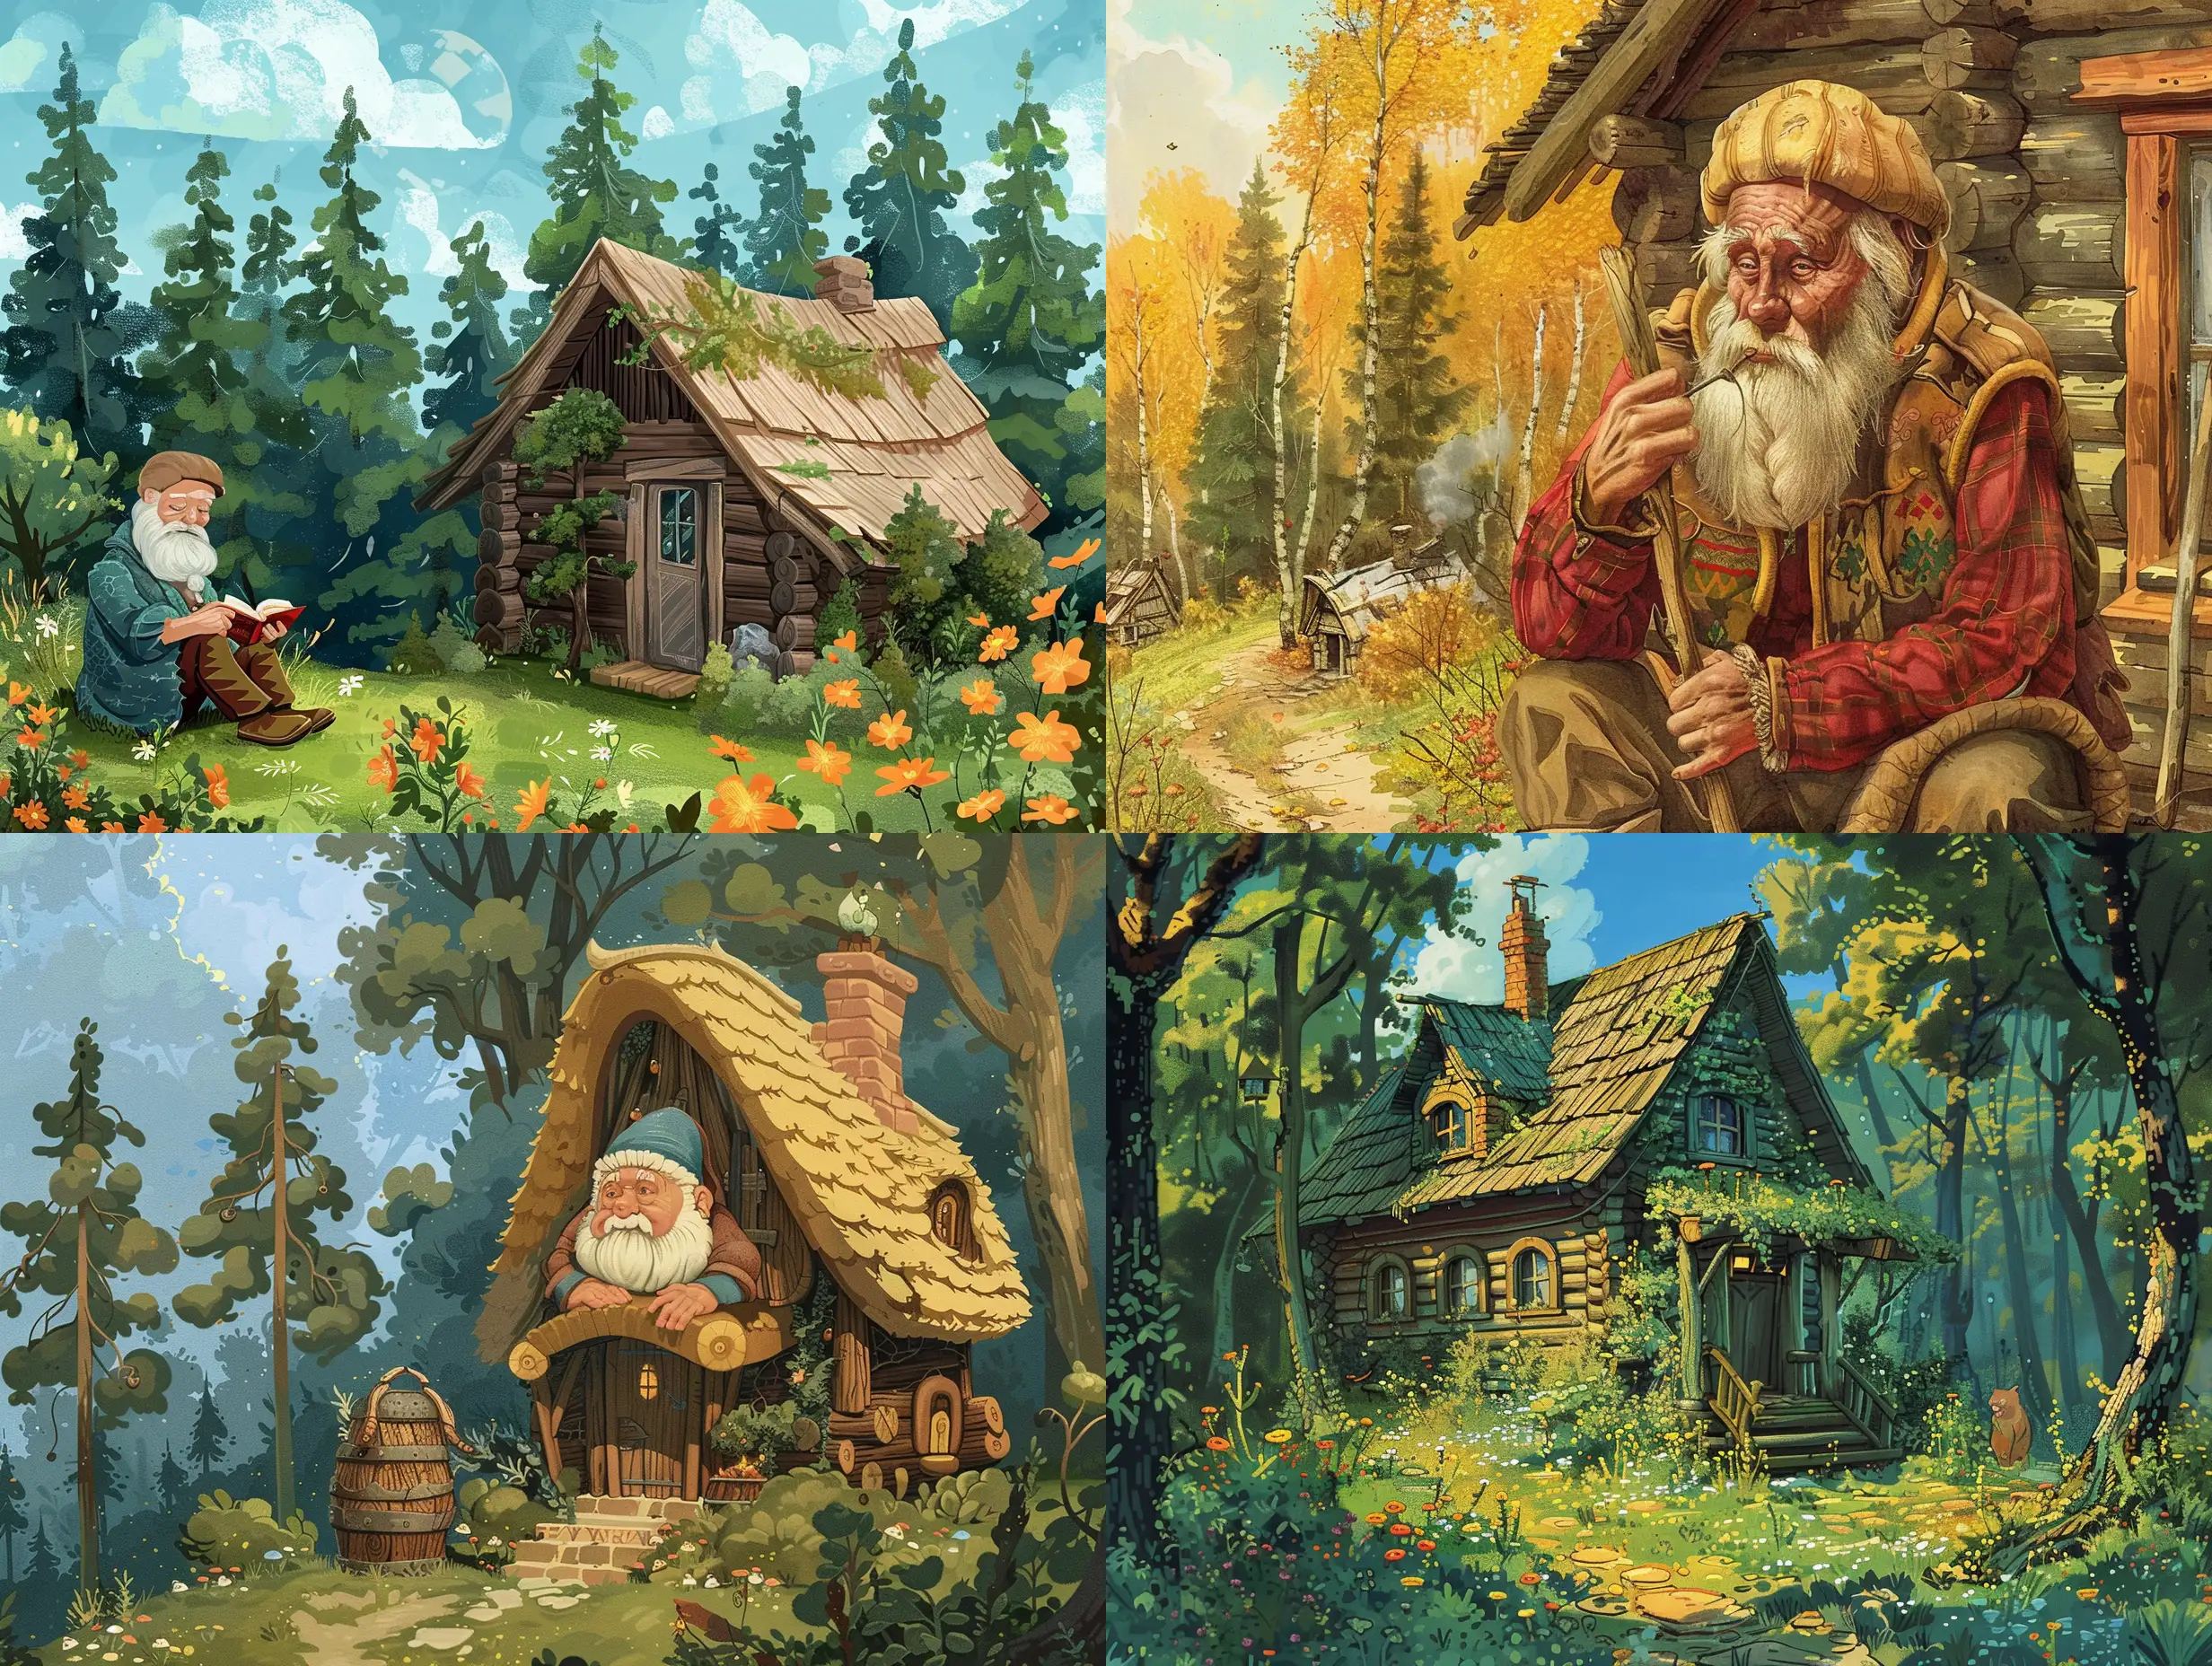 Russian-Man-Living-in-a-Forest-Cottage-Disney-Fairytale-Illustration